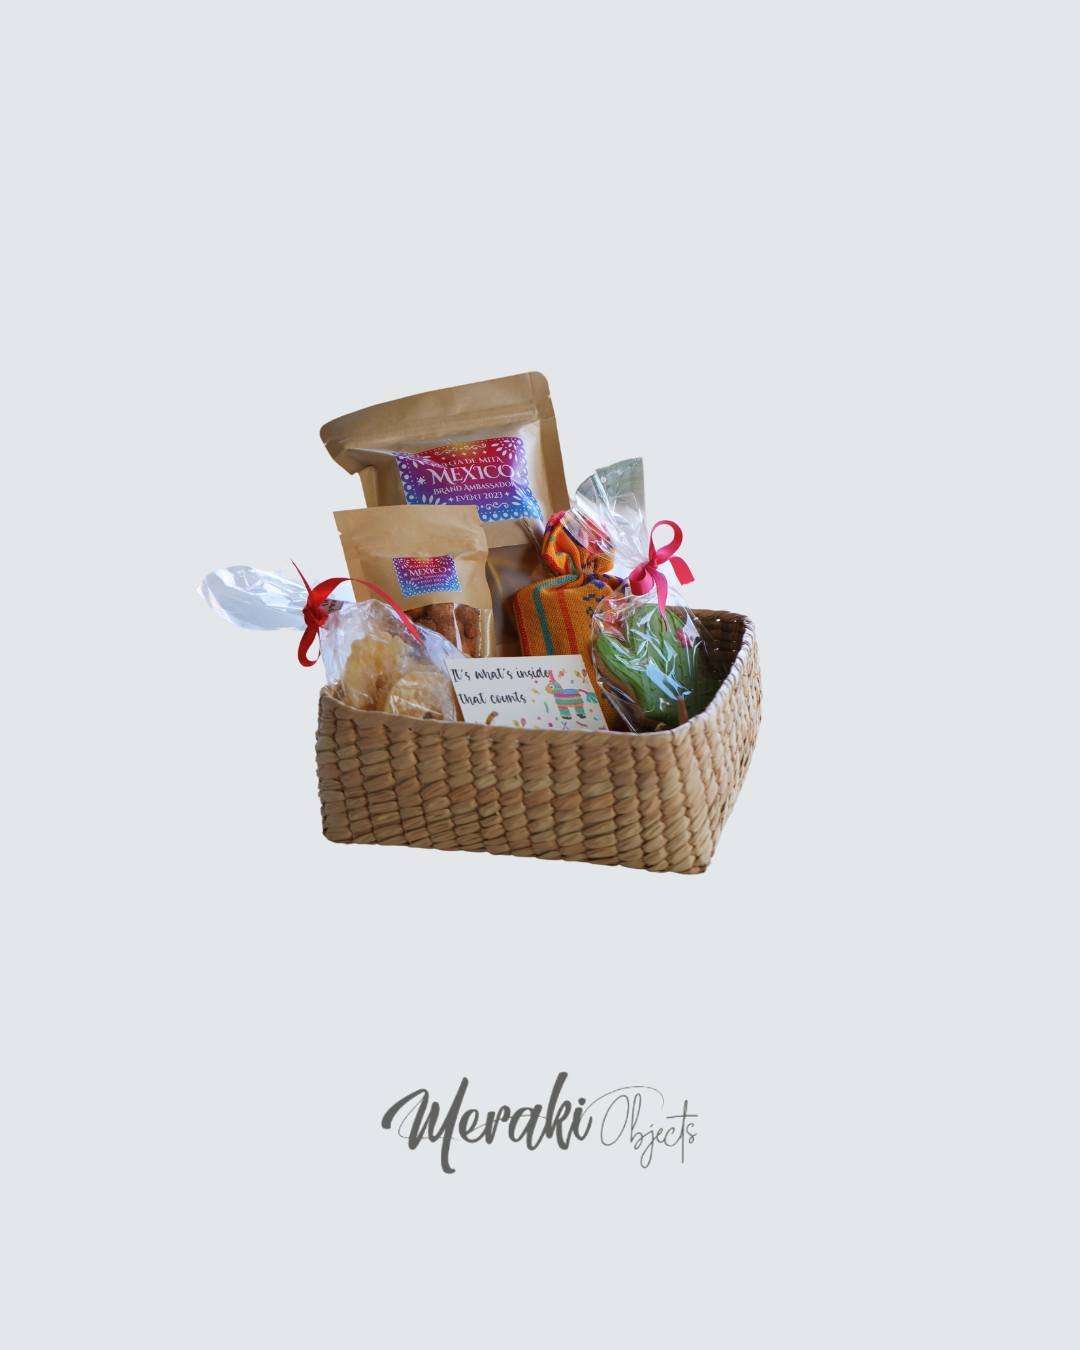 🌟 Make your guests feel truly special with our unforgettable welcome gifts experience! 🎁 Perfect for event planners looking to add a unique touch to their gatherings. From traditional sweets to modern treats, we've got something for everyone! Let u